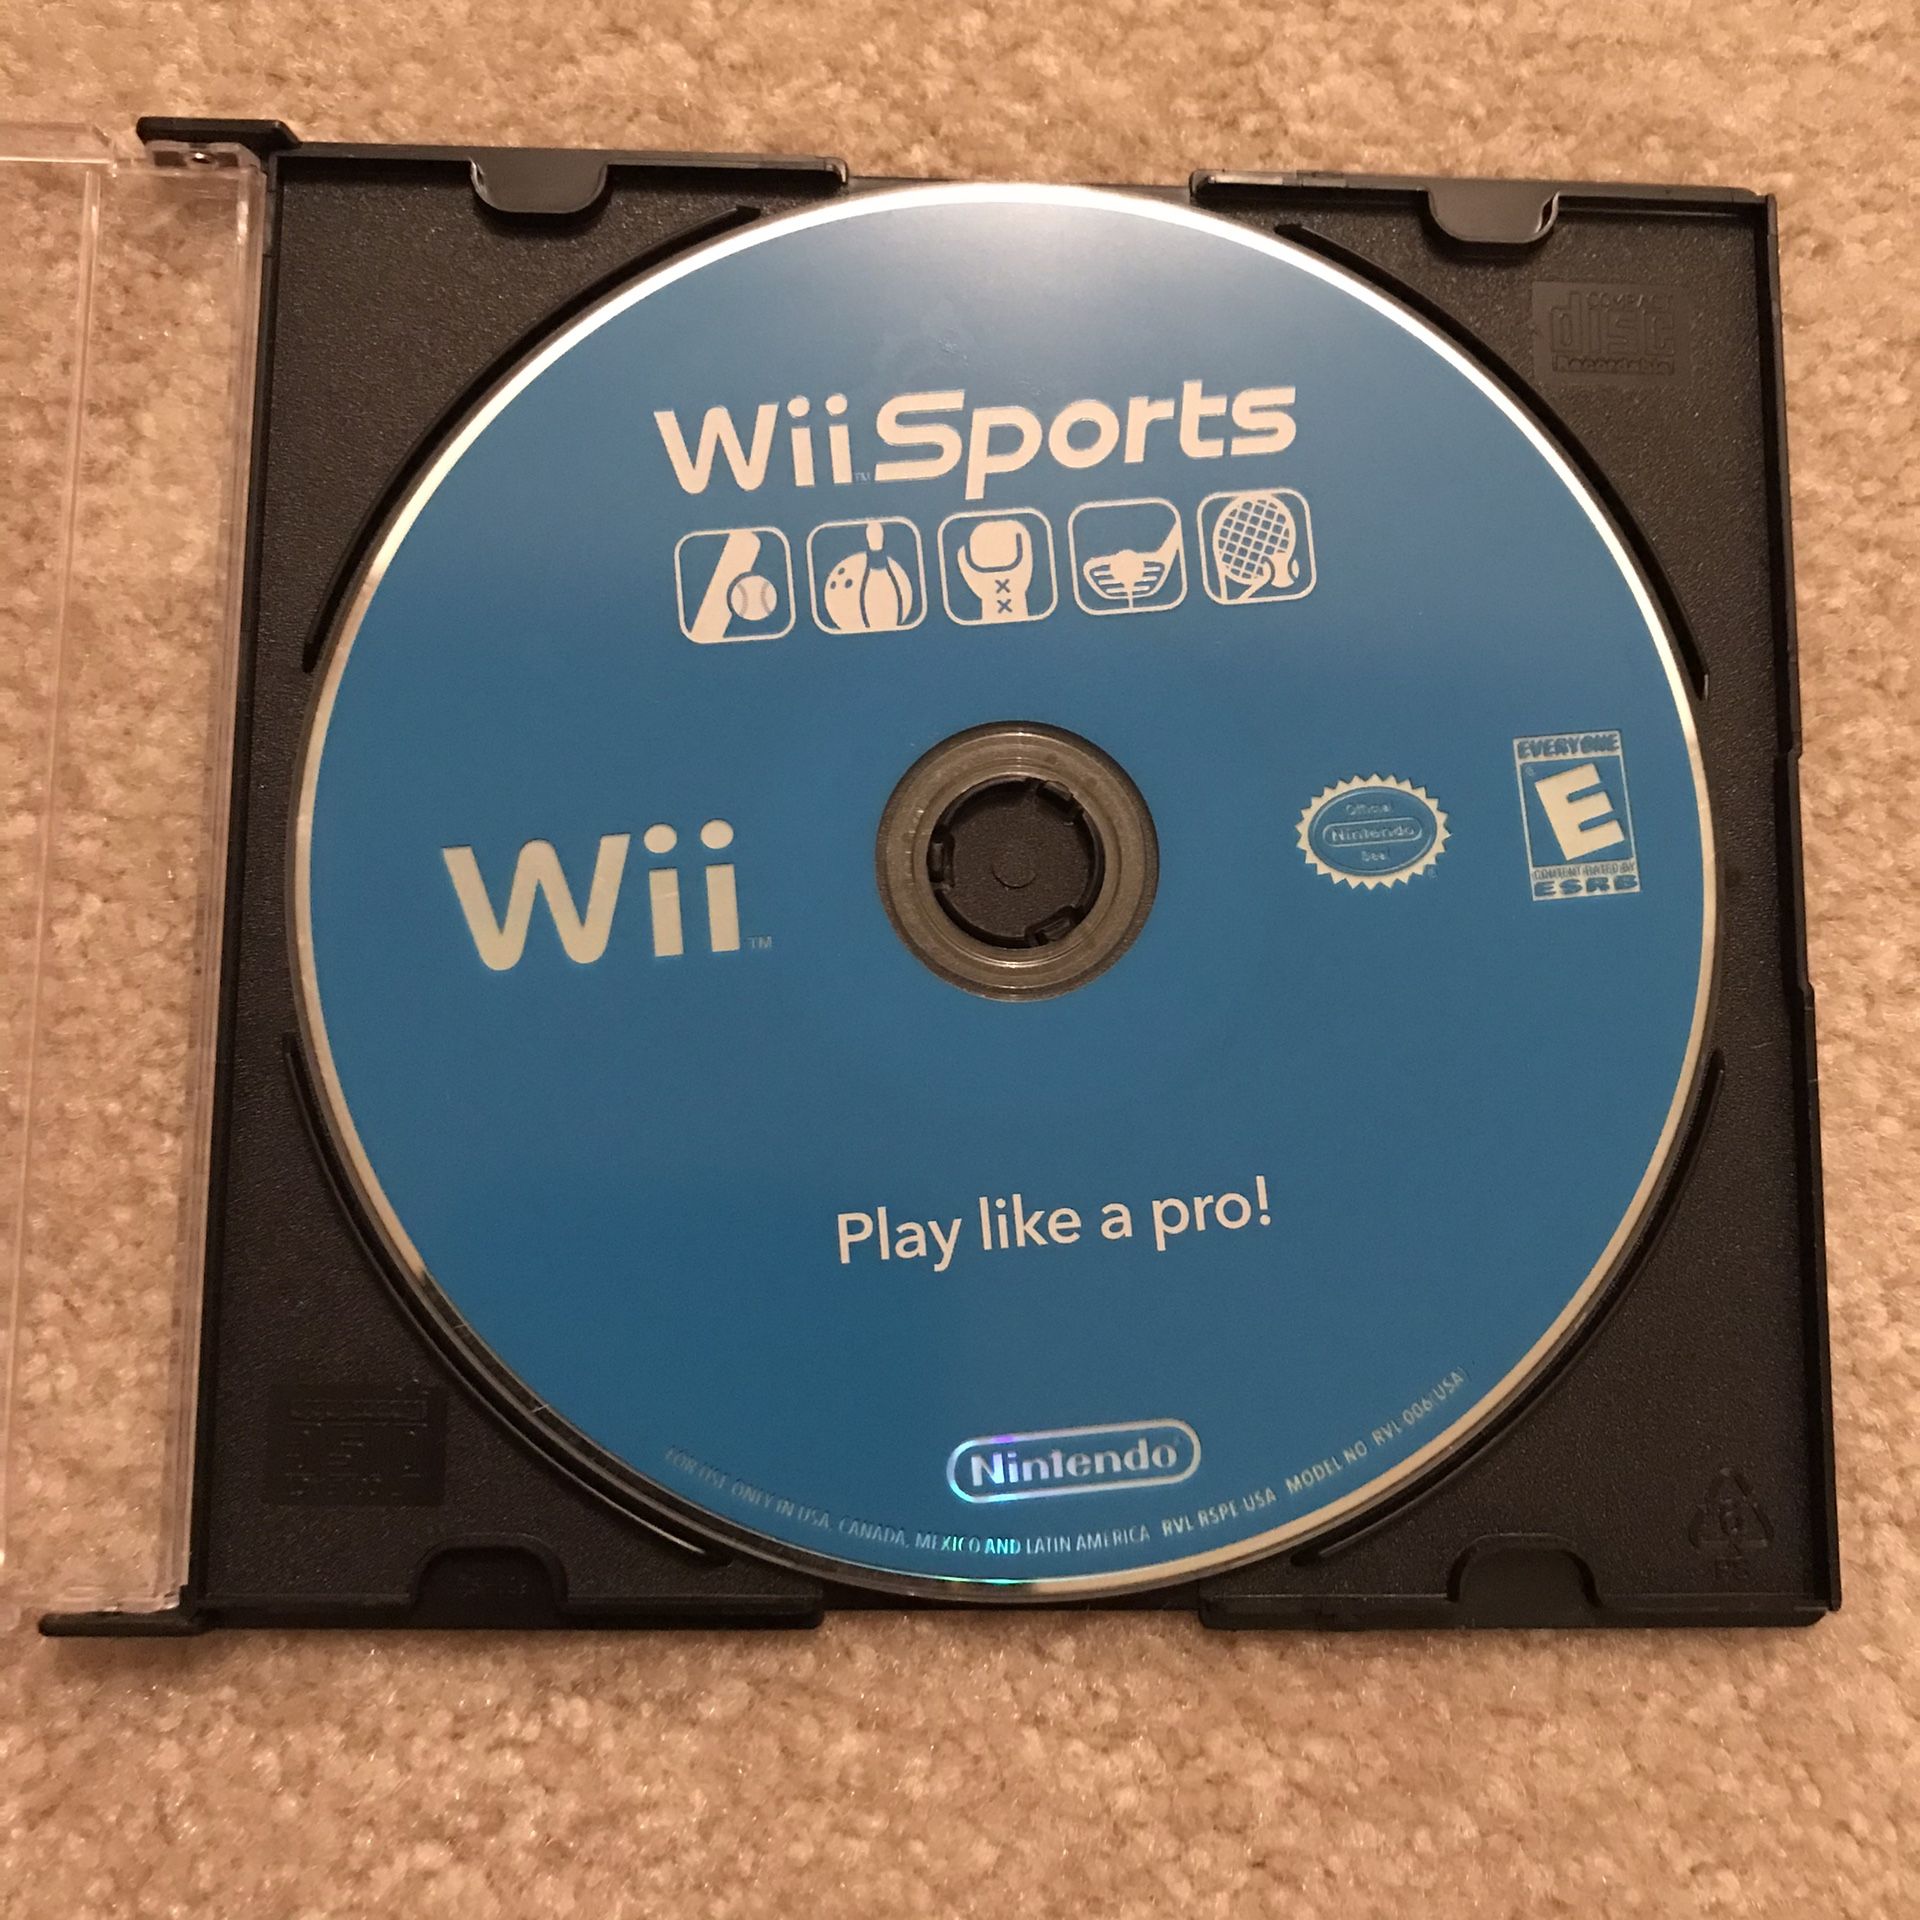 Wii sports nintendo video game disc works great